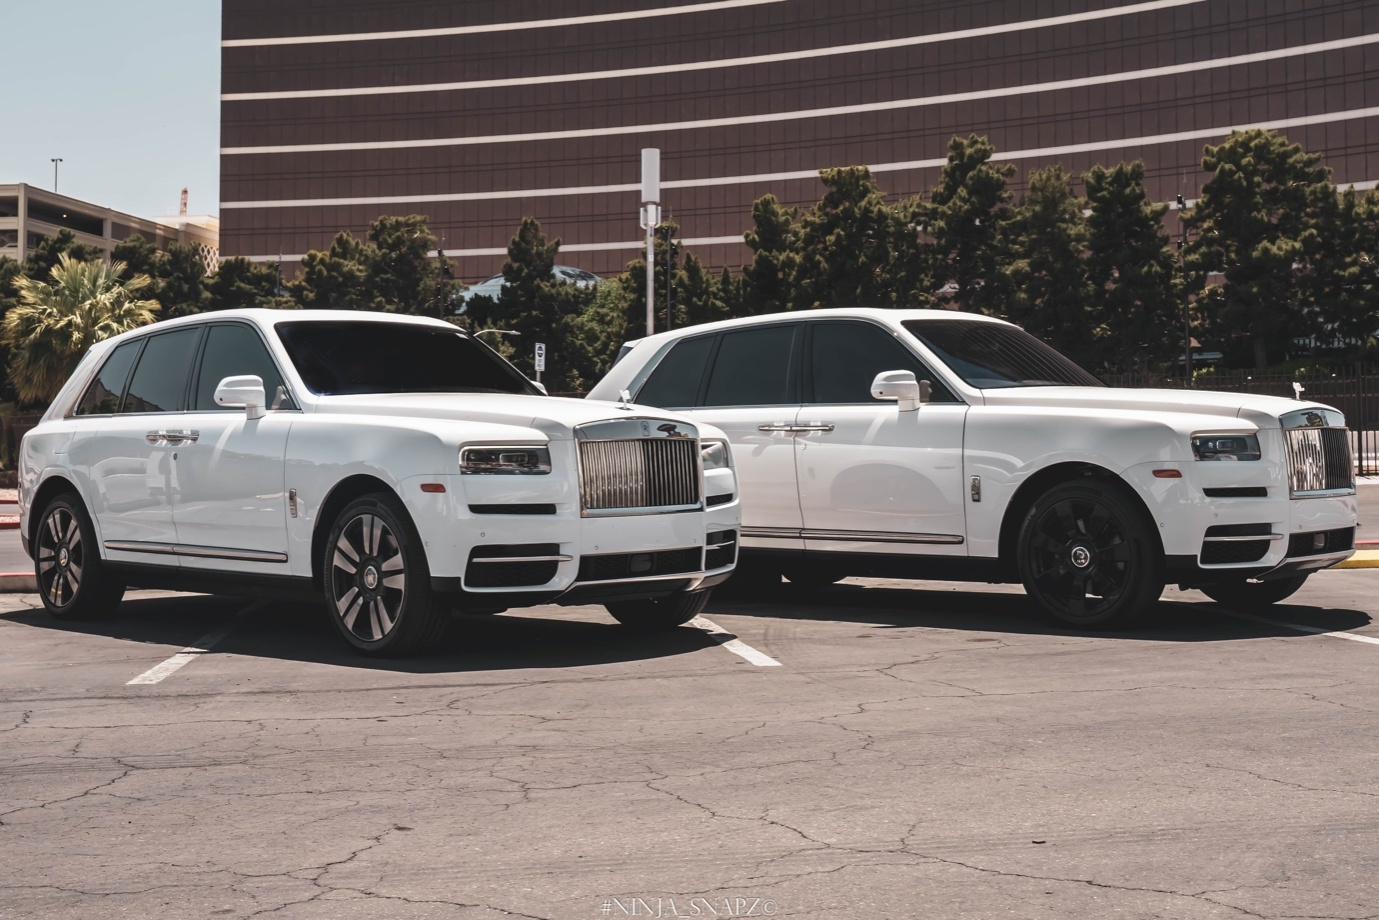  Two Cullinan cars in a parking